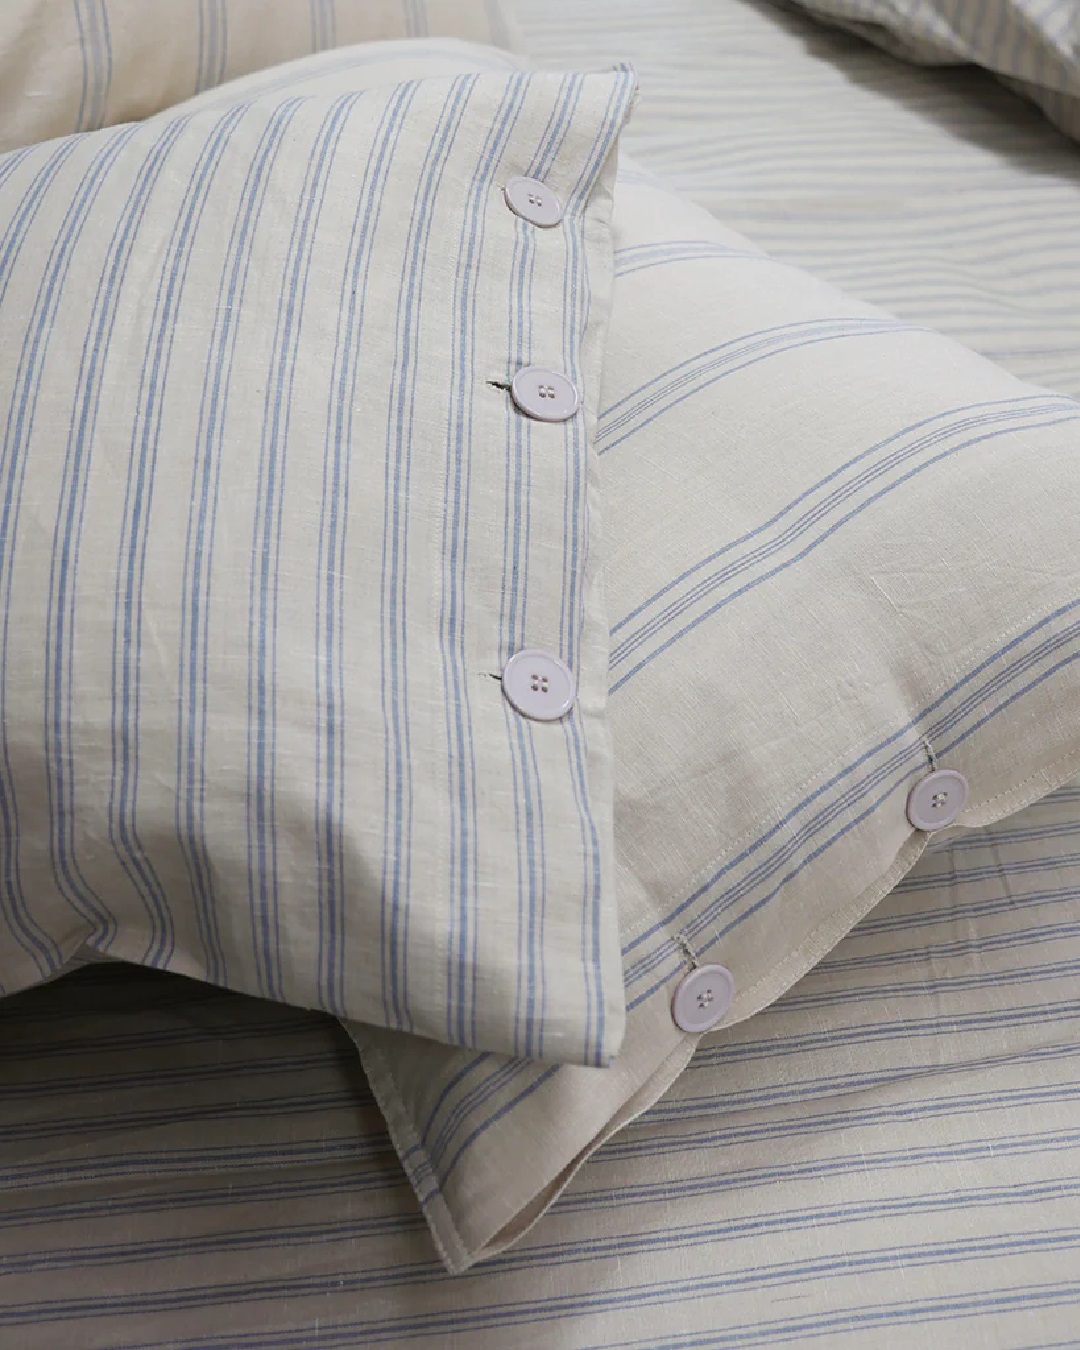 Striped blue and white pillows